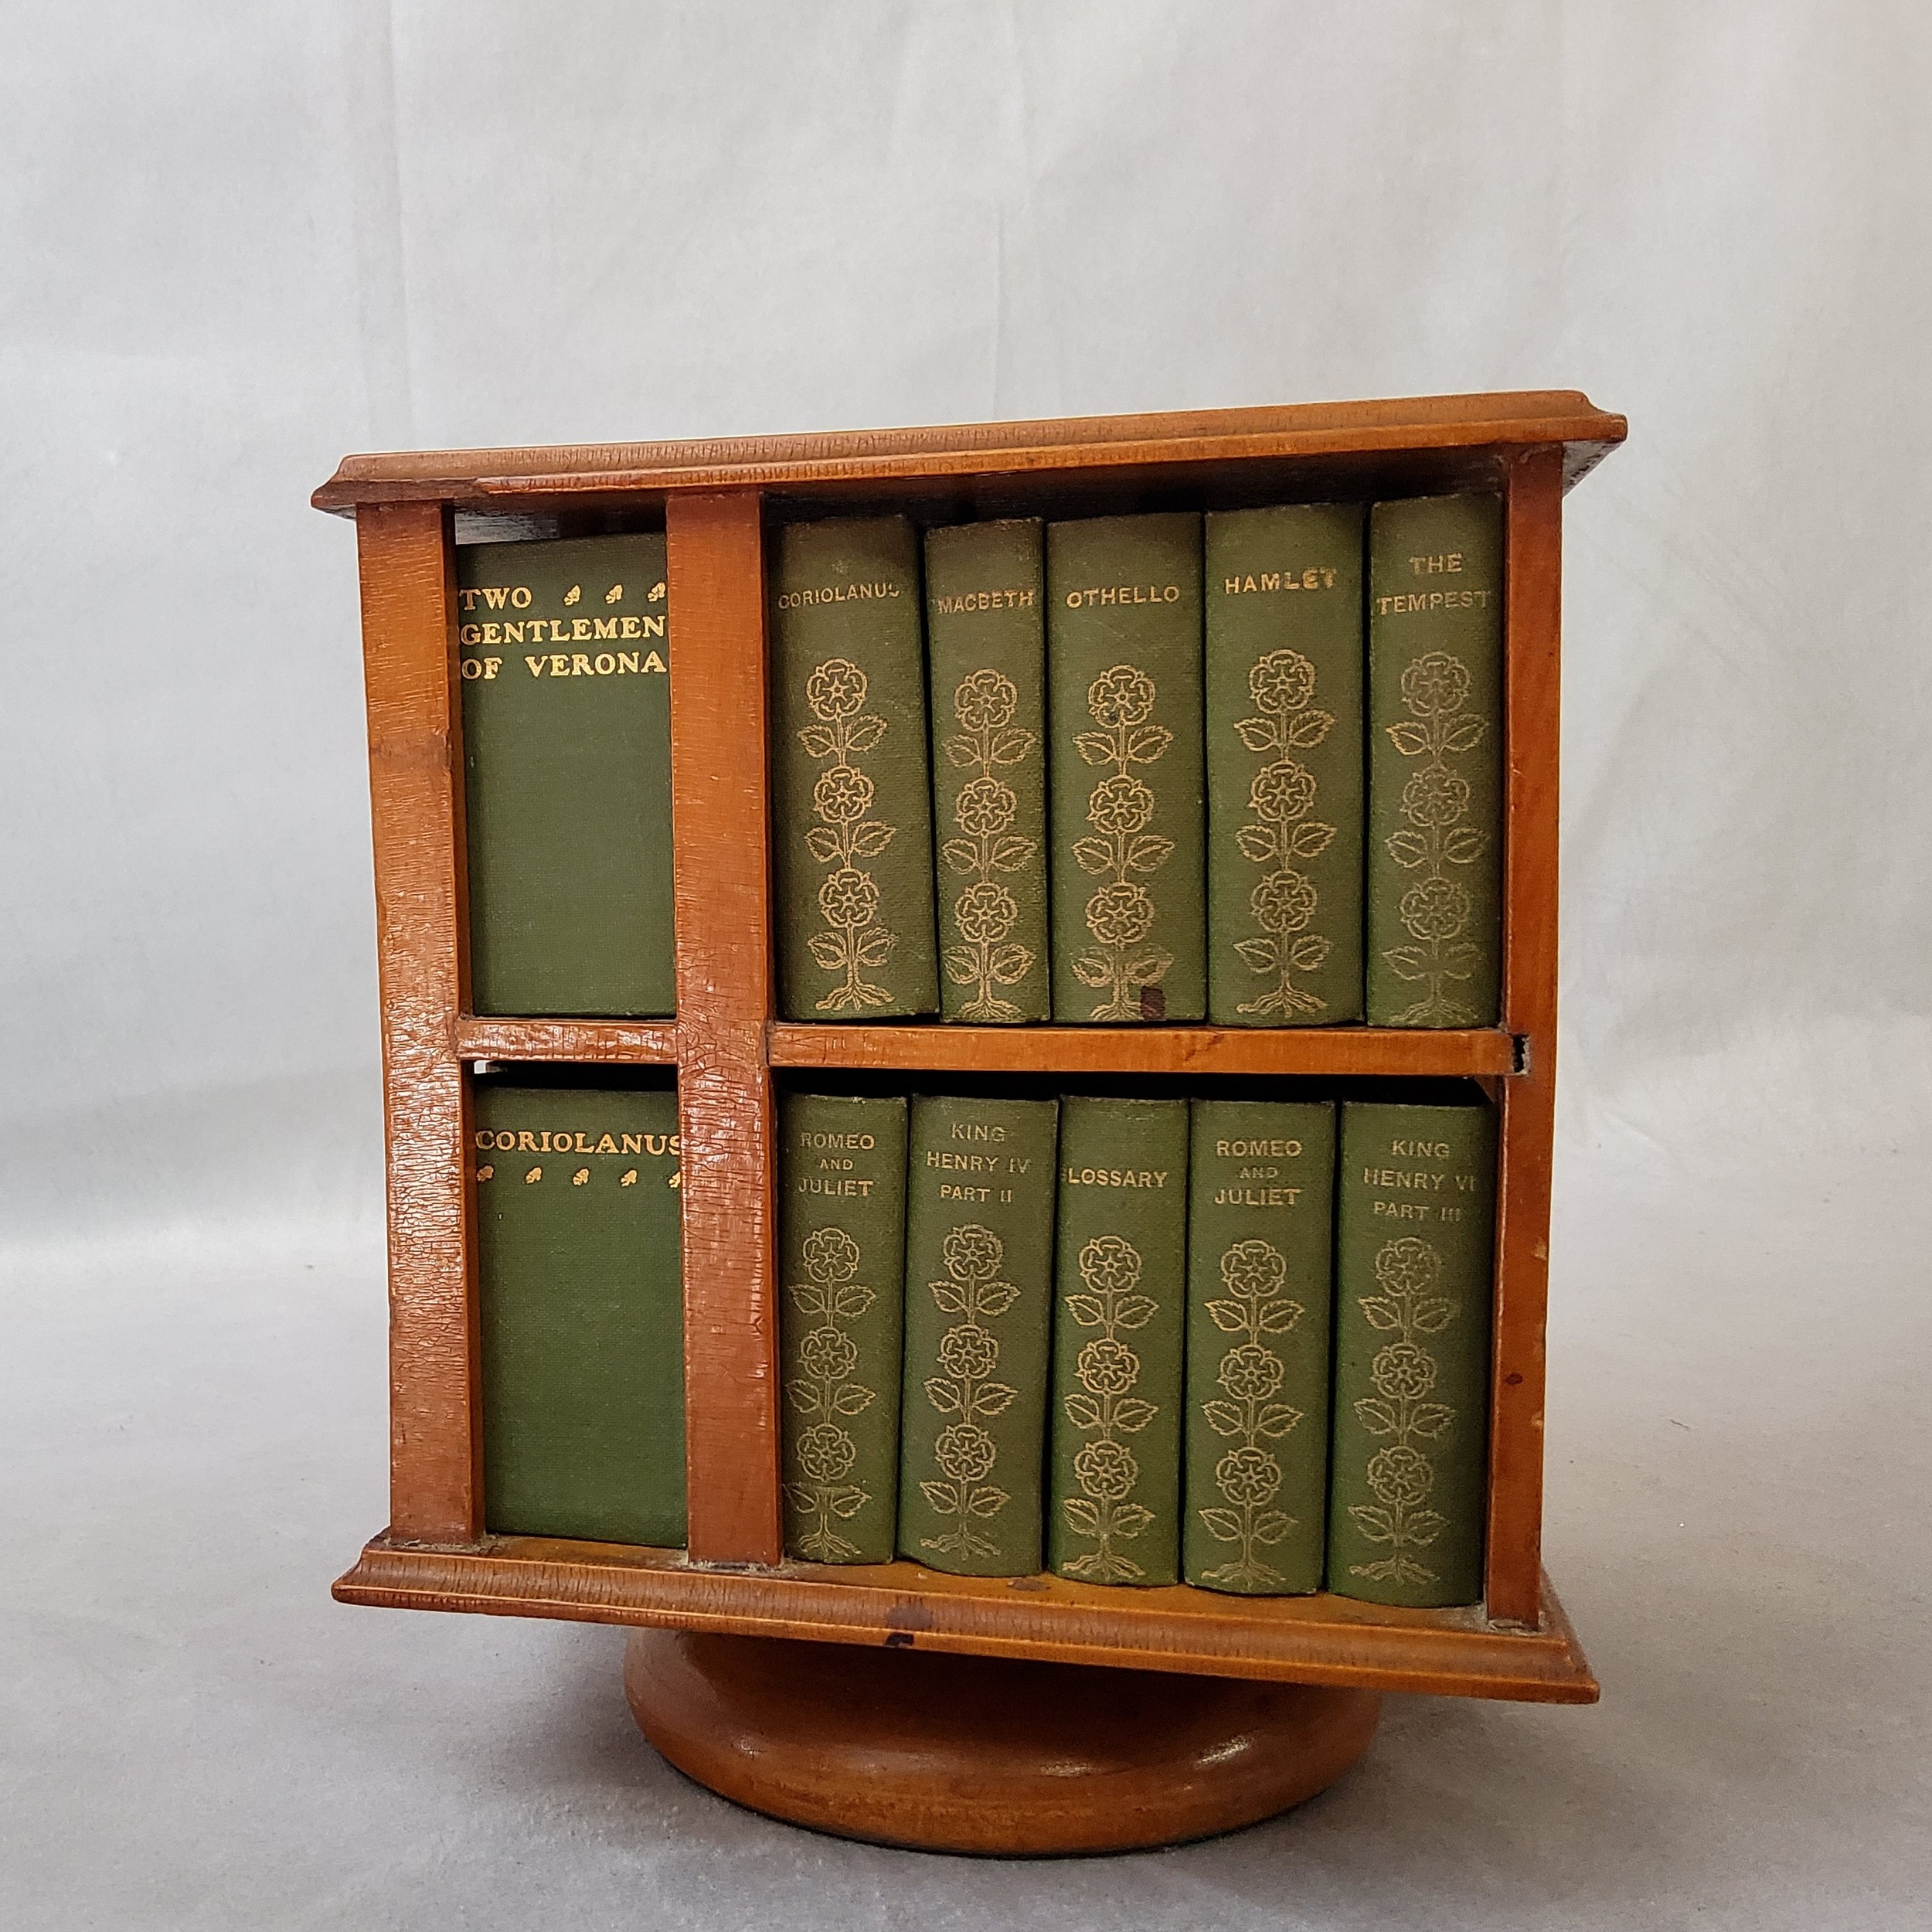 A 19th-century revolving miniature bookcase, containing miniature editions of the work of William - Image 5 of 6